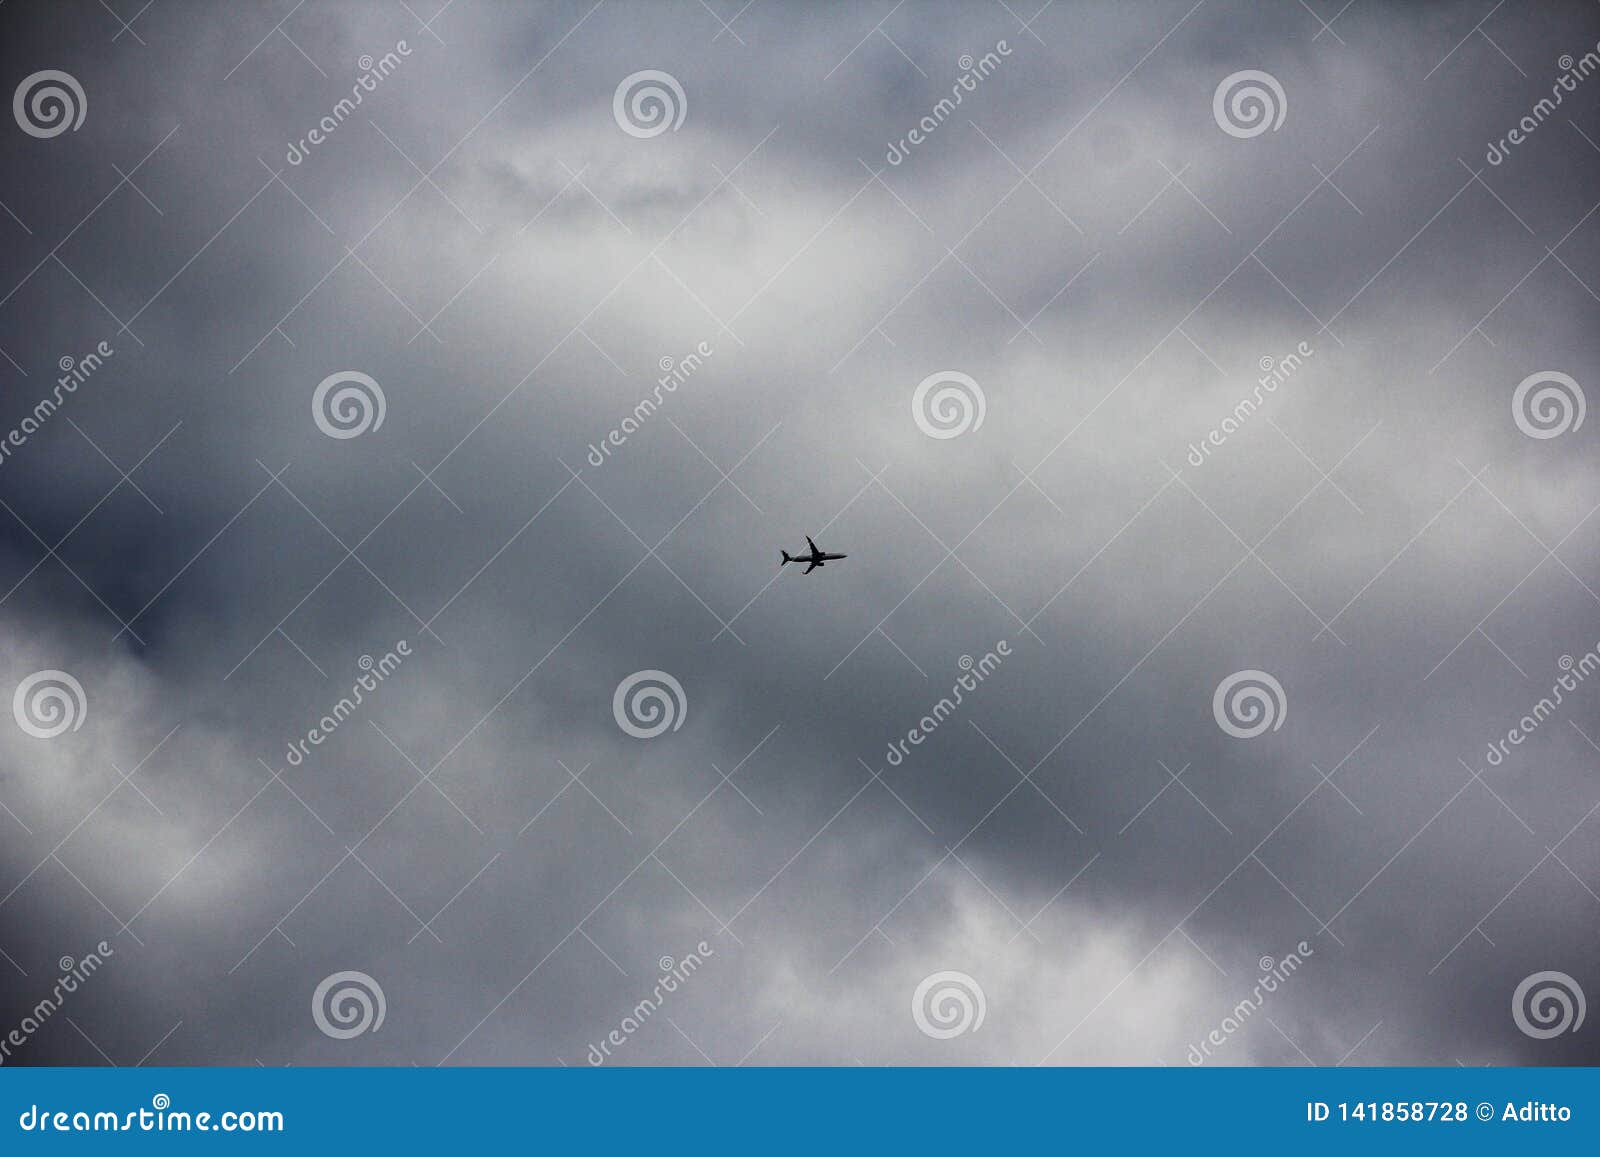 plane on cloudy day